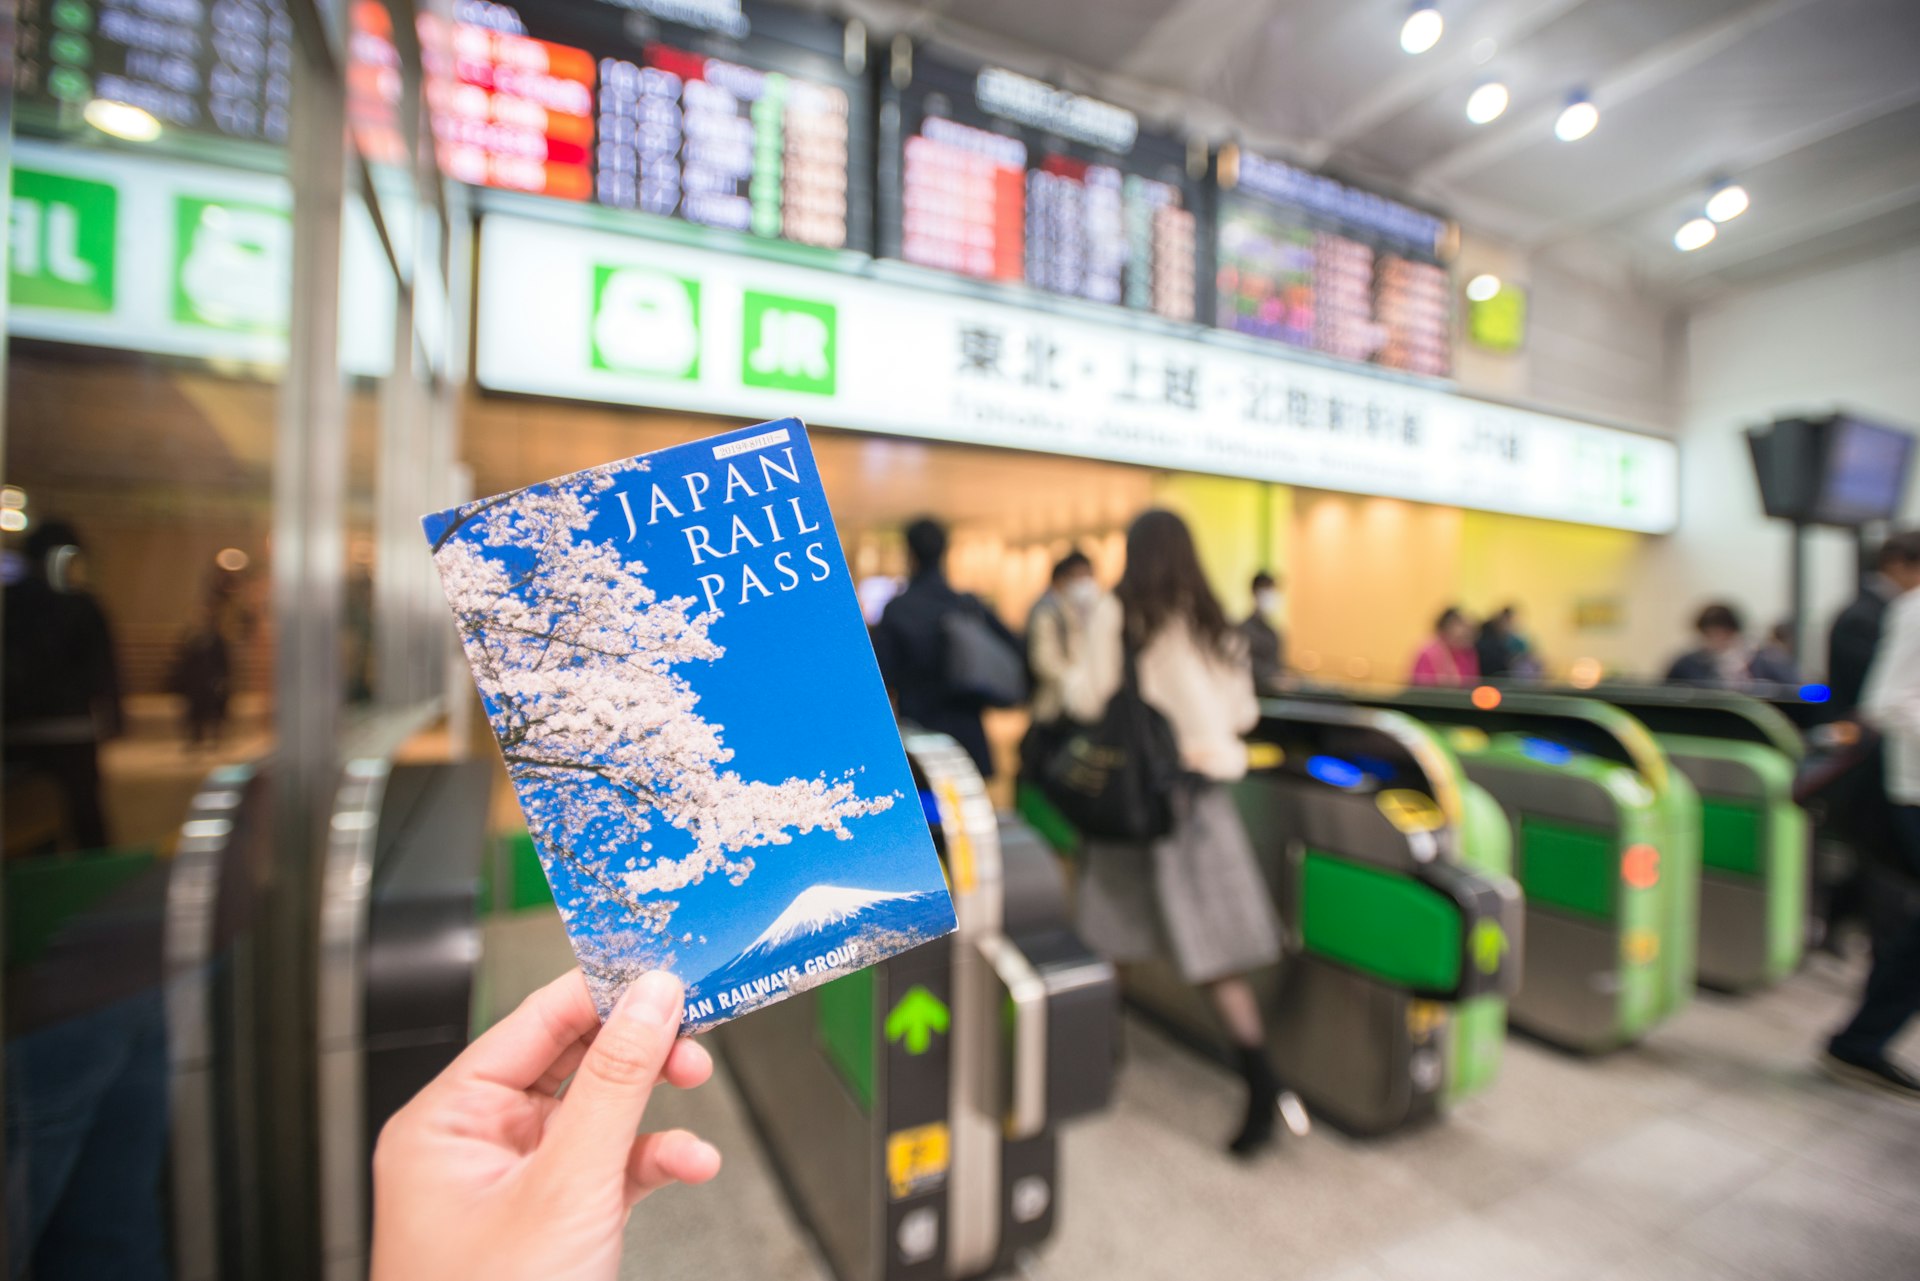 A hand holding up a travel pass ticket in front of ticket gate at Tokyo Station.